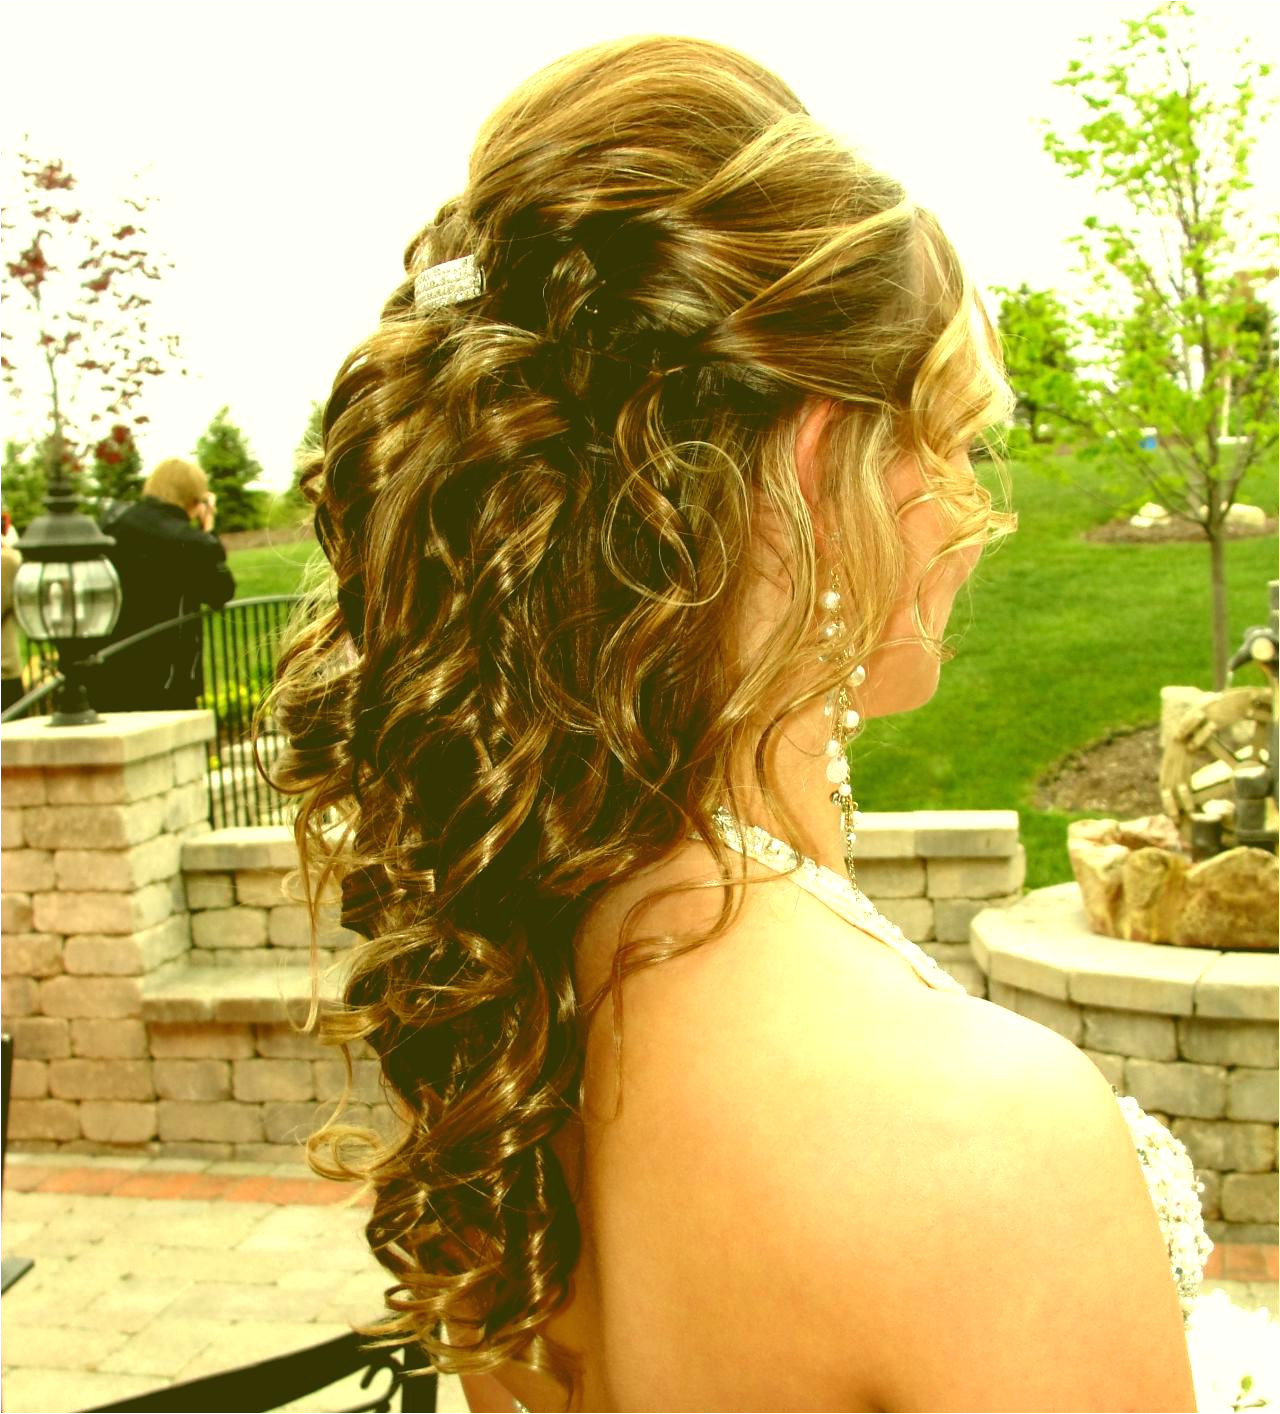 Prom Down Hairstyles for Short Hair New Prom Hairstyles for Short Hair Half Up Half Down